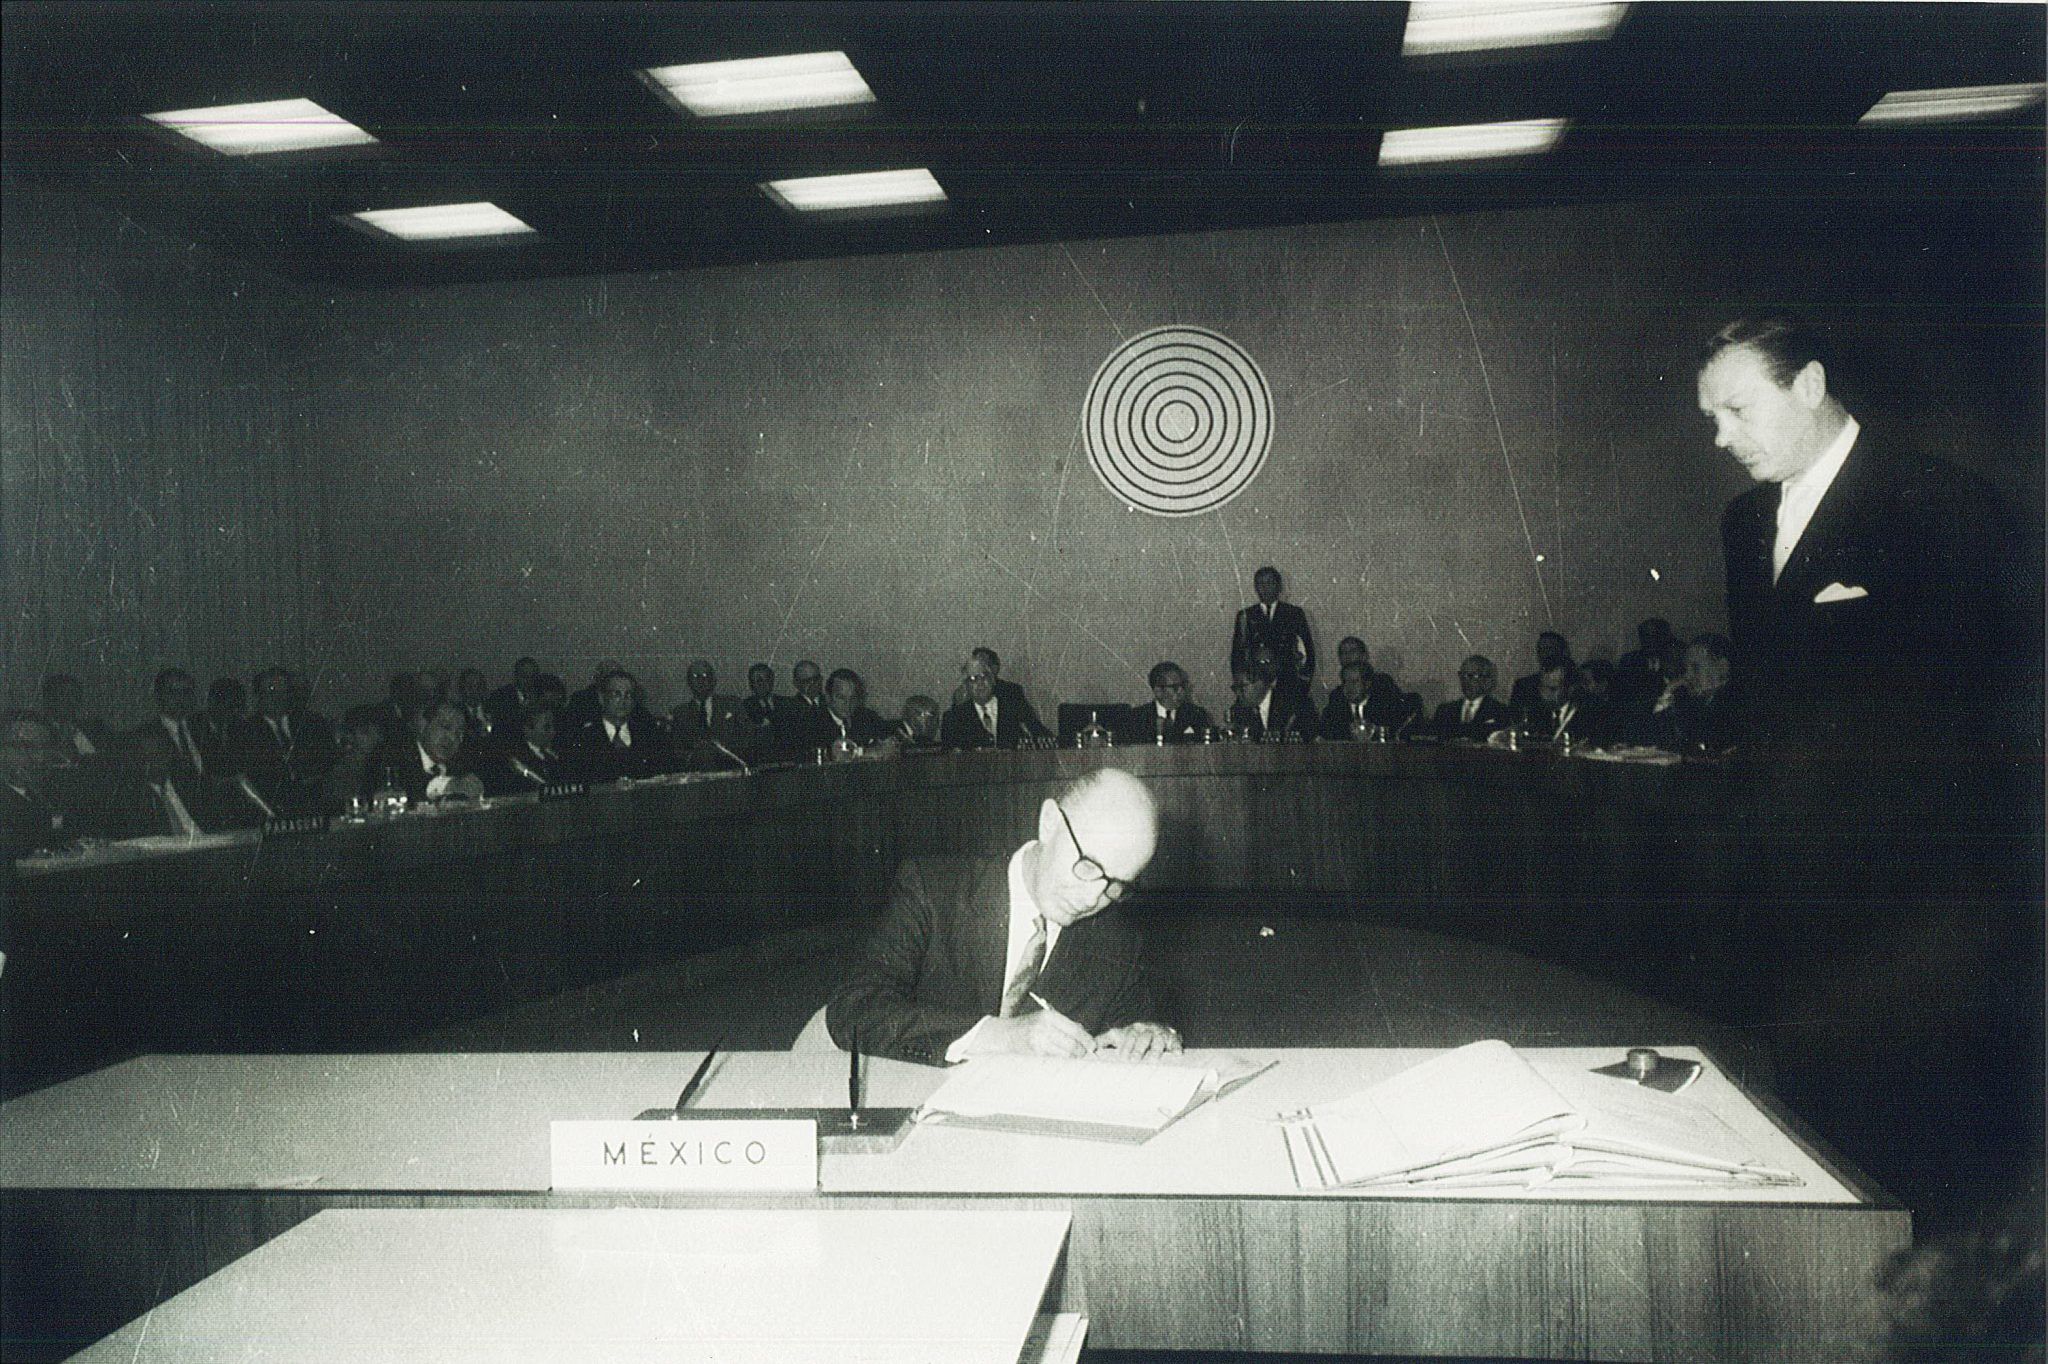 Mexico signs the Treaty of Tlatelolco in 1967.